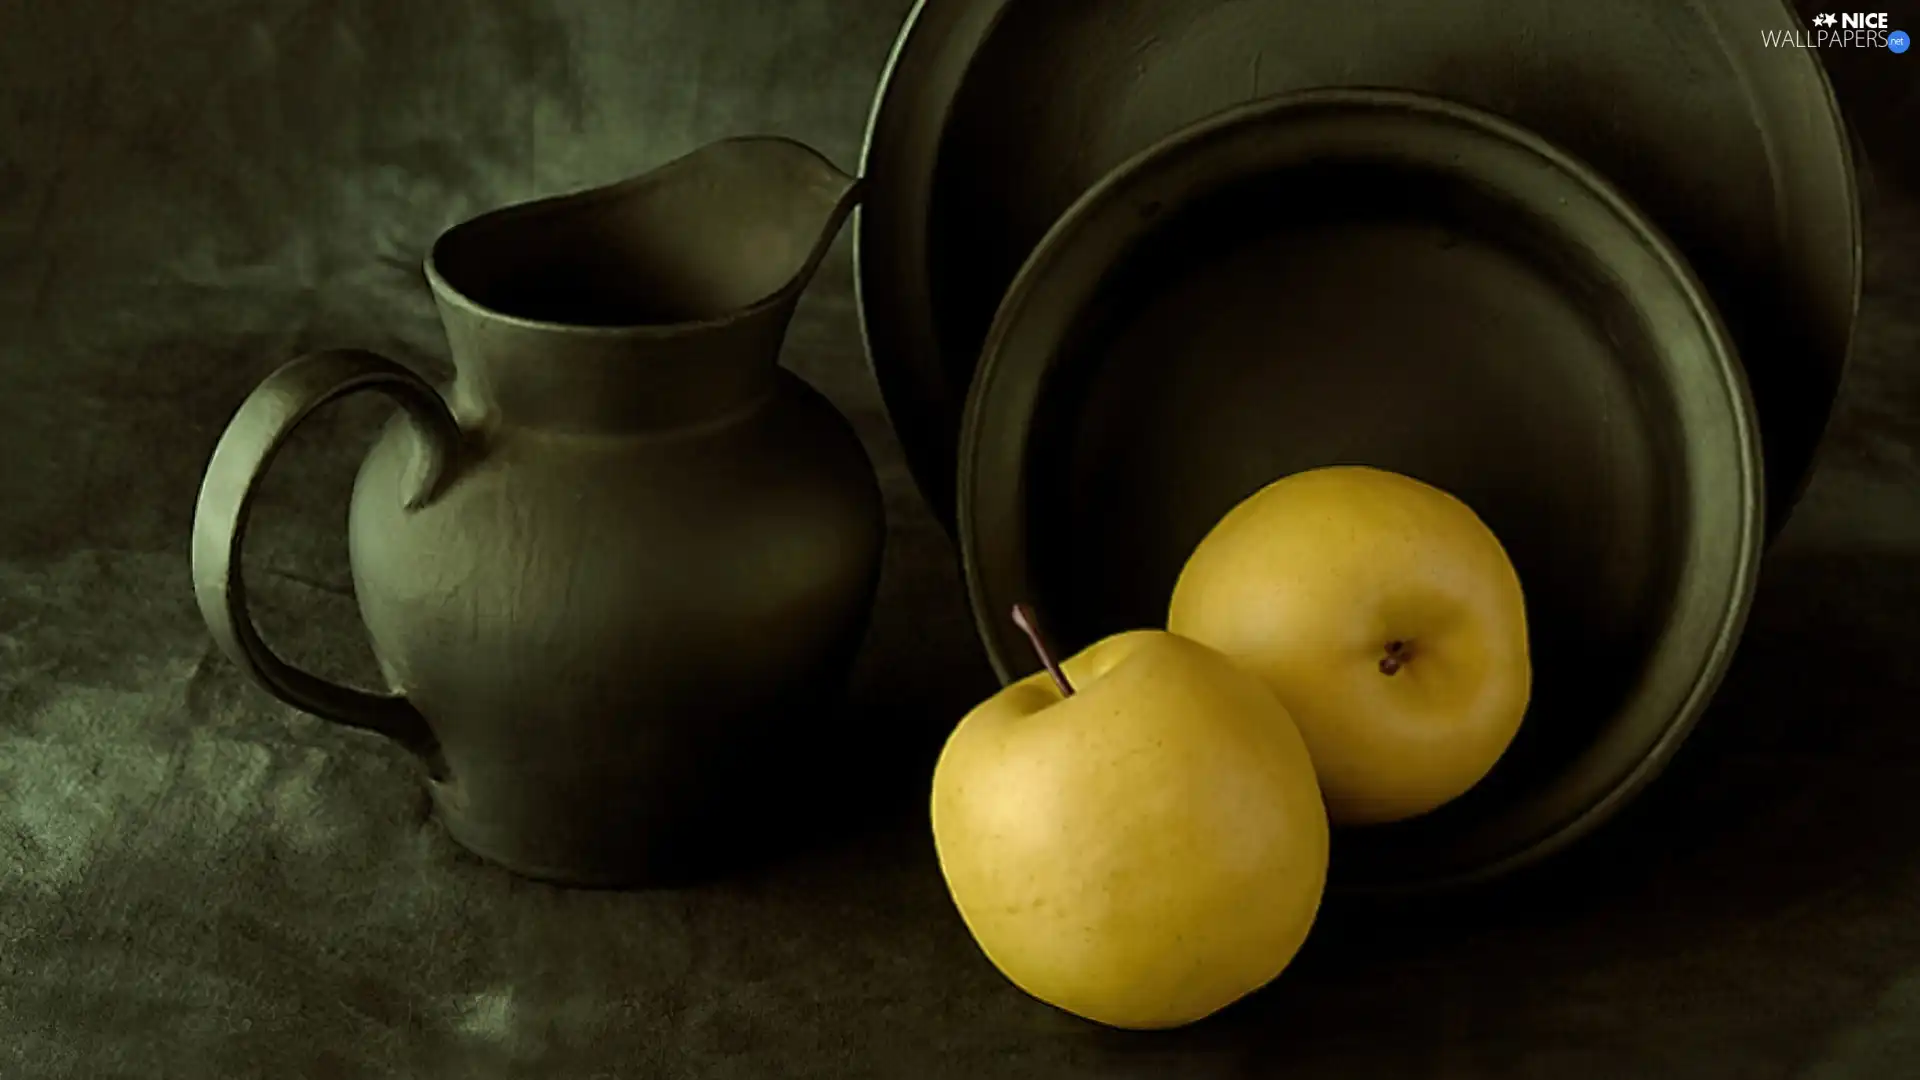 metal, Yellow, apples, dishes